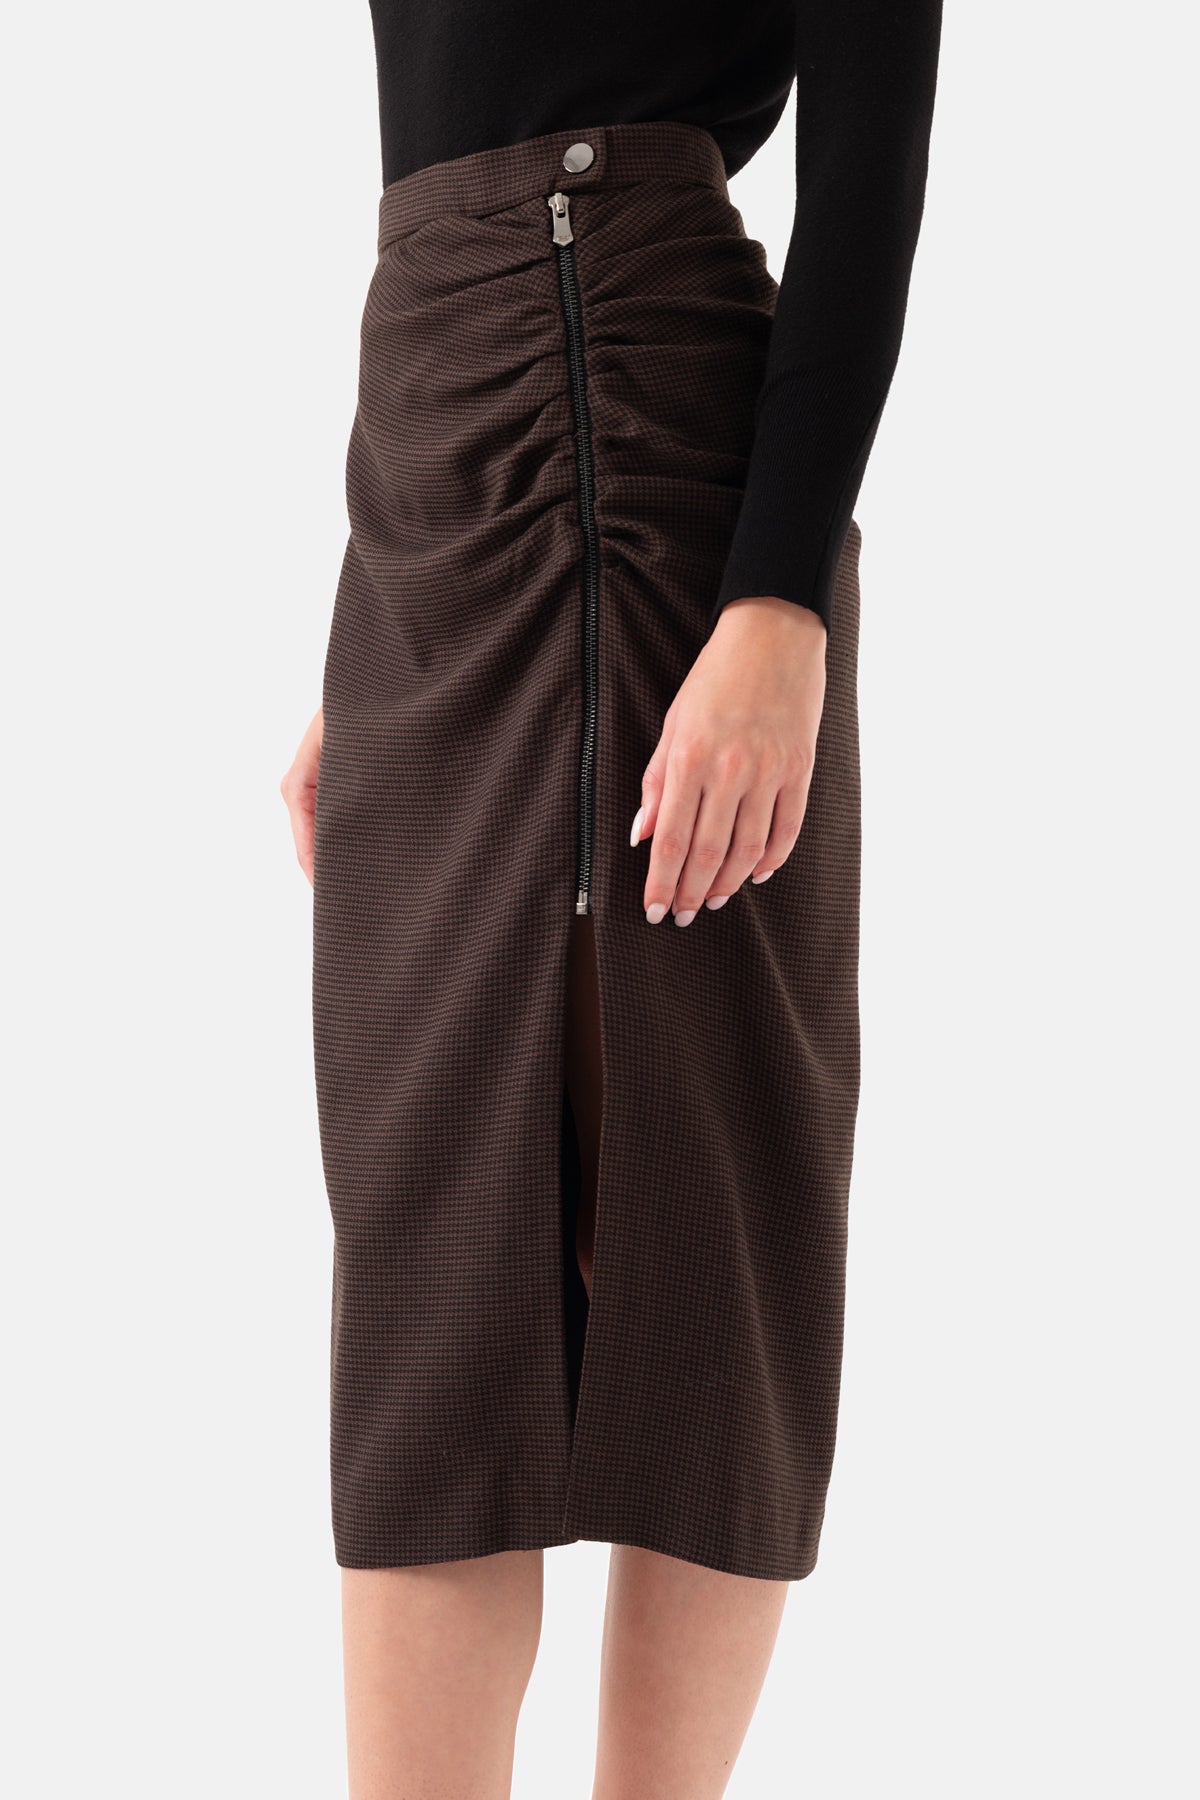 Brown Crowbar Pattern Women's Midi Skirt With Zipper On The Side